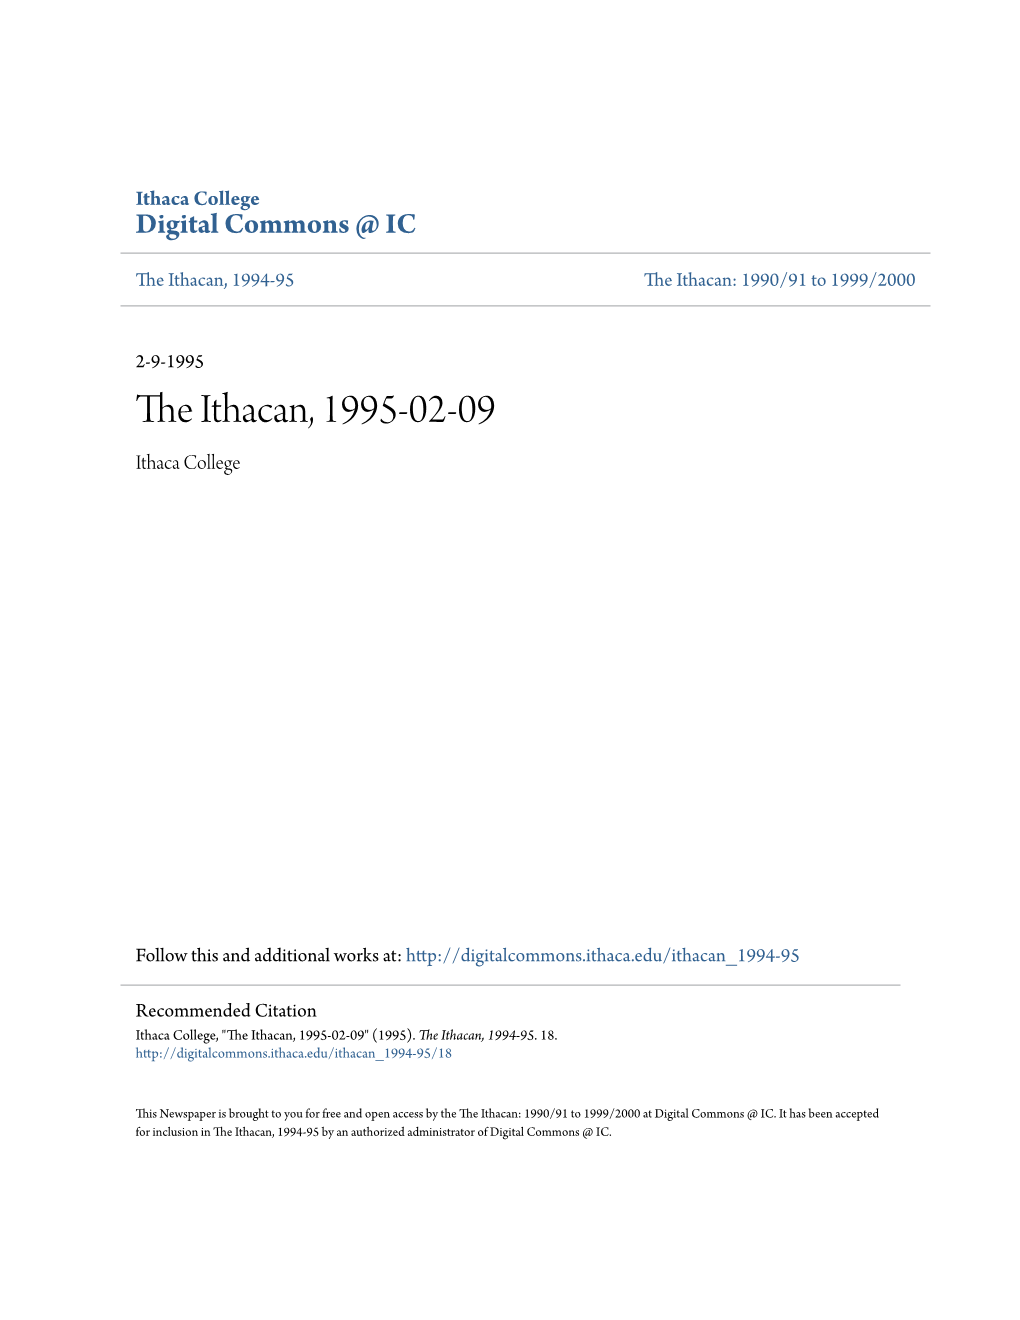 The Ithacan, 1995-02-09